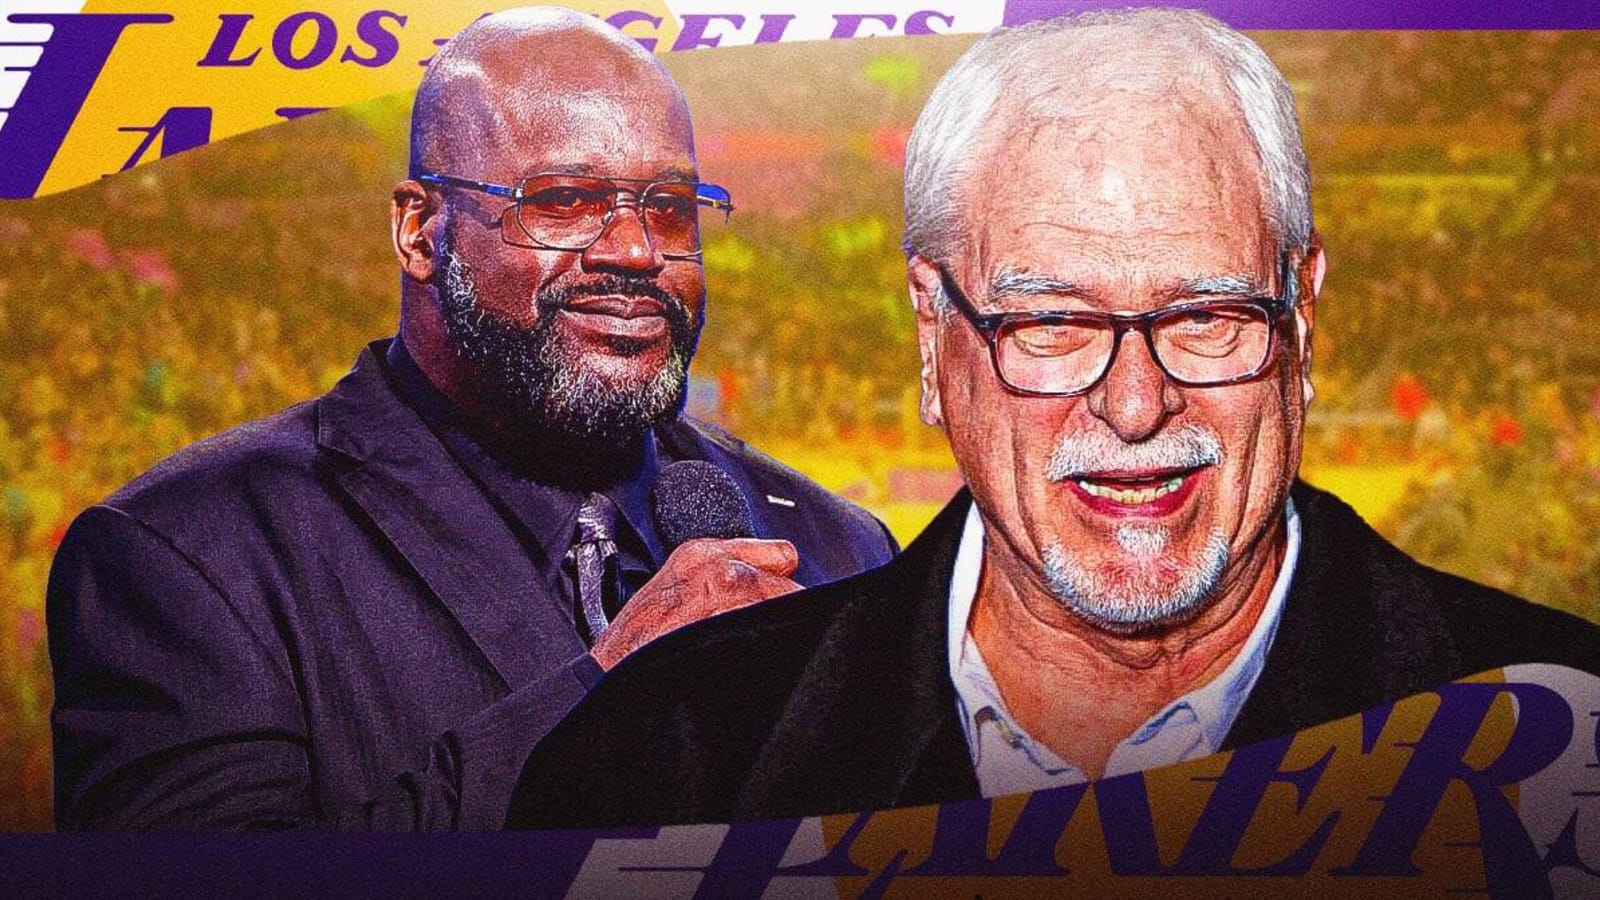 Ex-Lakers star Shaq seemingly jokes about NBA being scripted with Phil Jackson, Pacers story